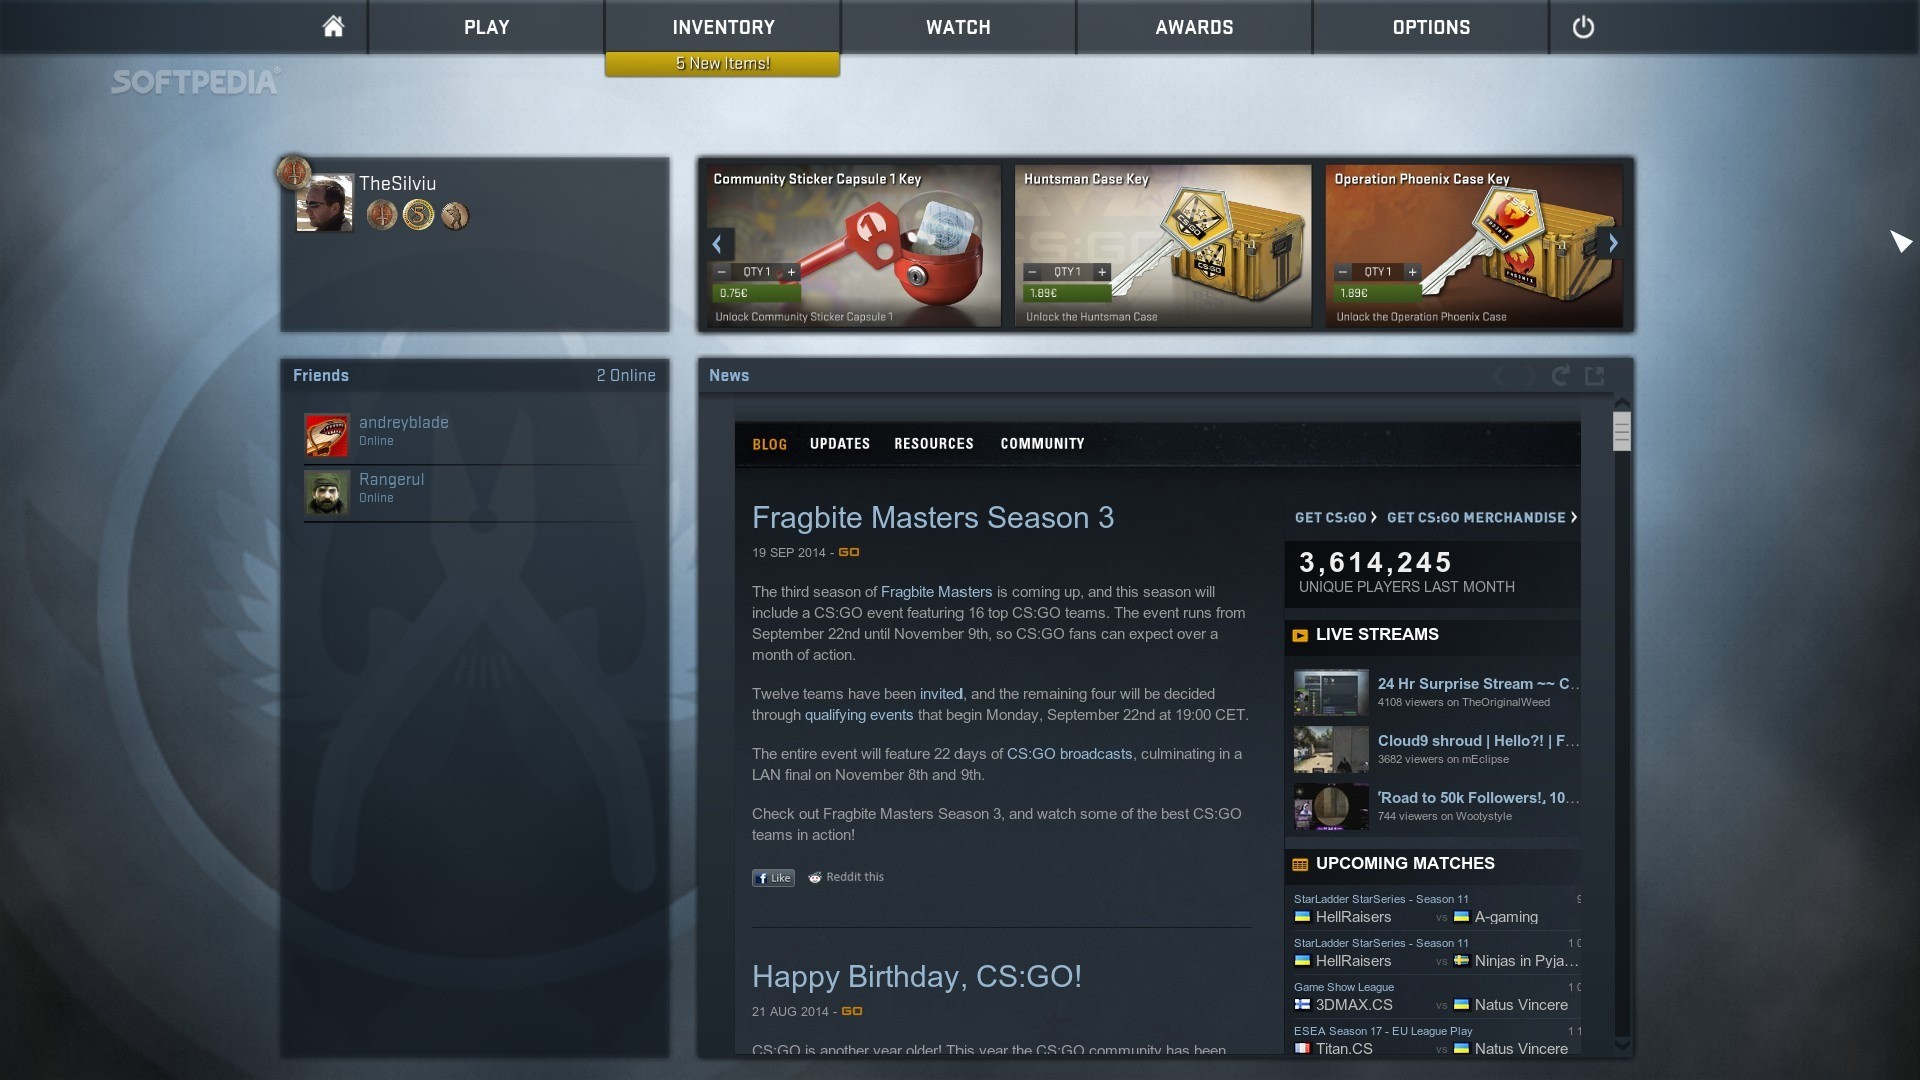 counter strike global offensive image